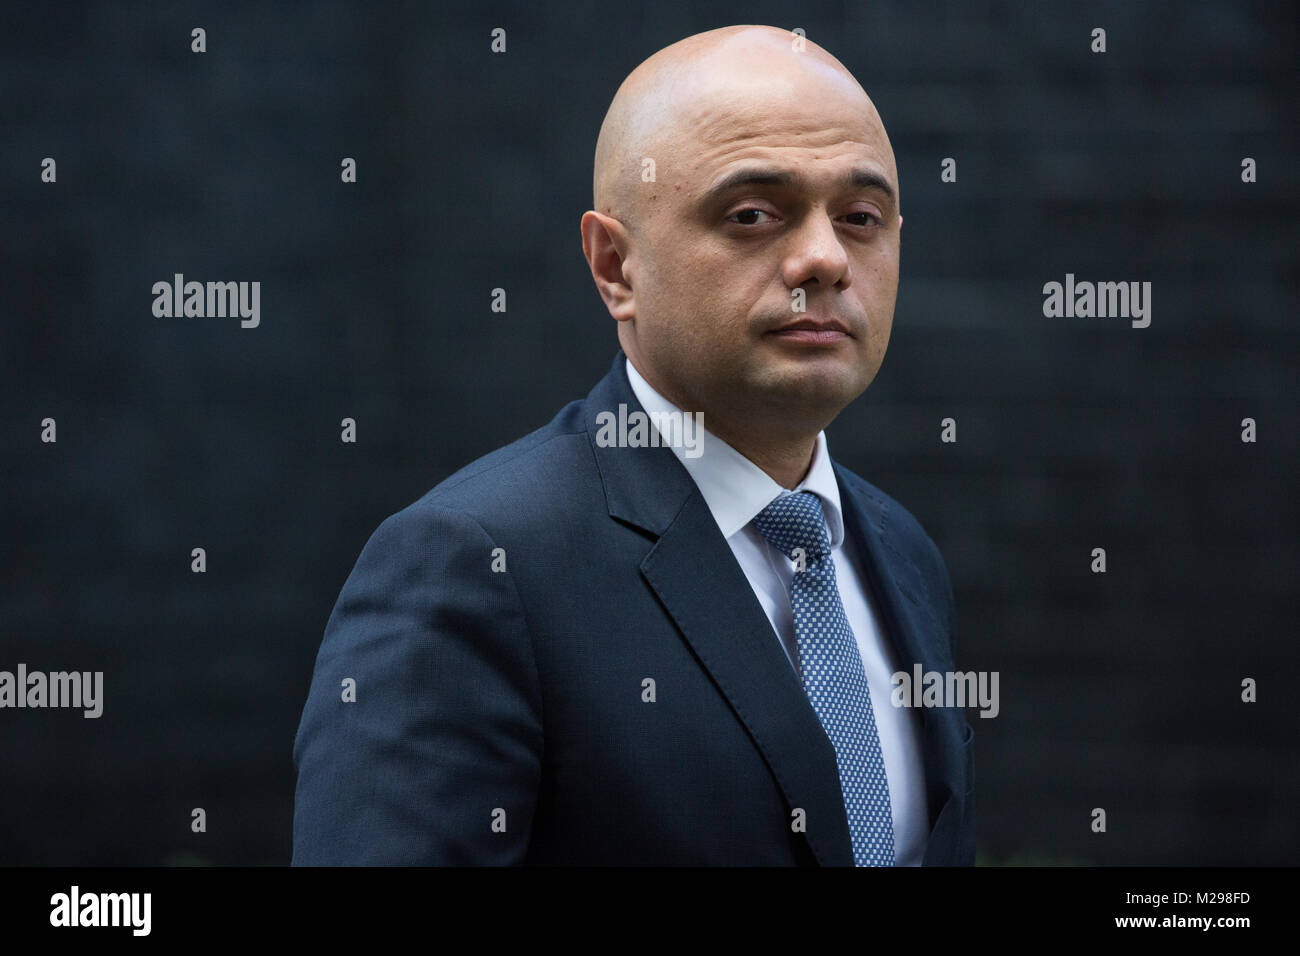 London, UK. 6th February, 2018. Sajid Javid MP, Secretary of State for Housing, Communities and Local Government, leaves 10 Downing Street following a Cabinet meeting. Credit: Mark Kerrison/Alamy Live News Stock Photo